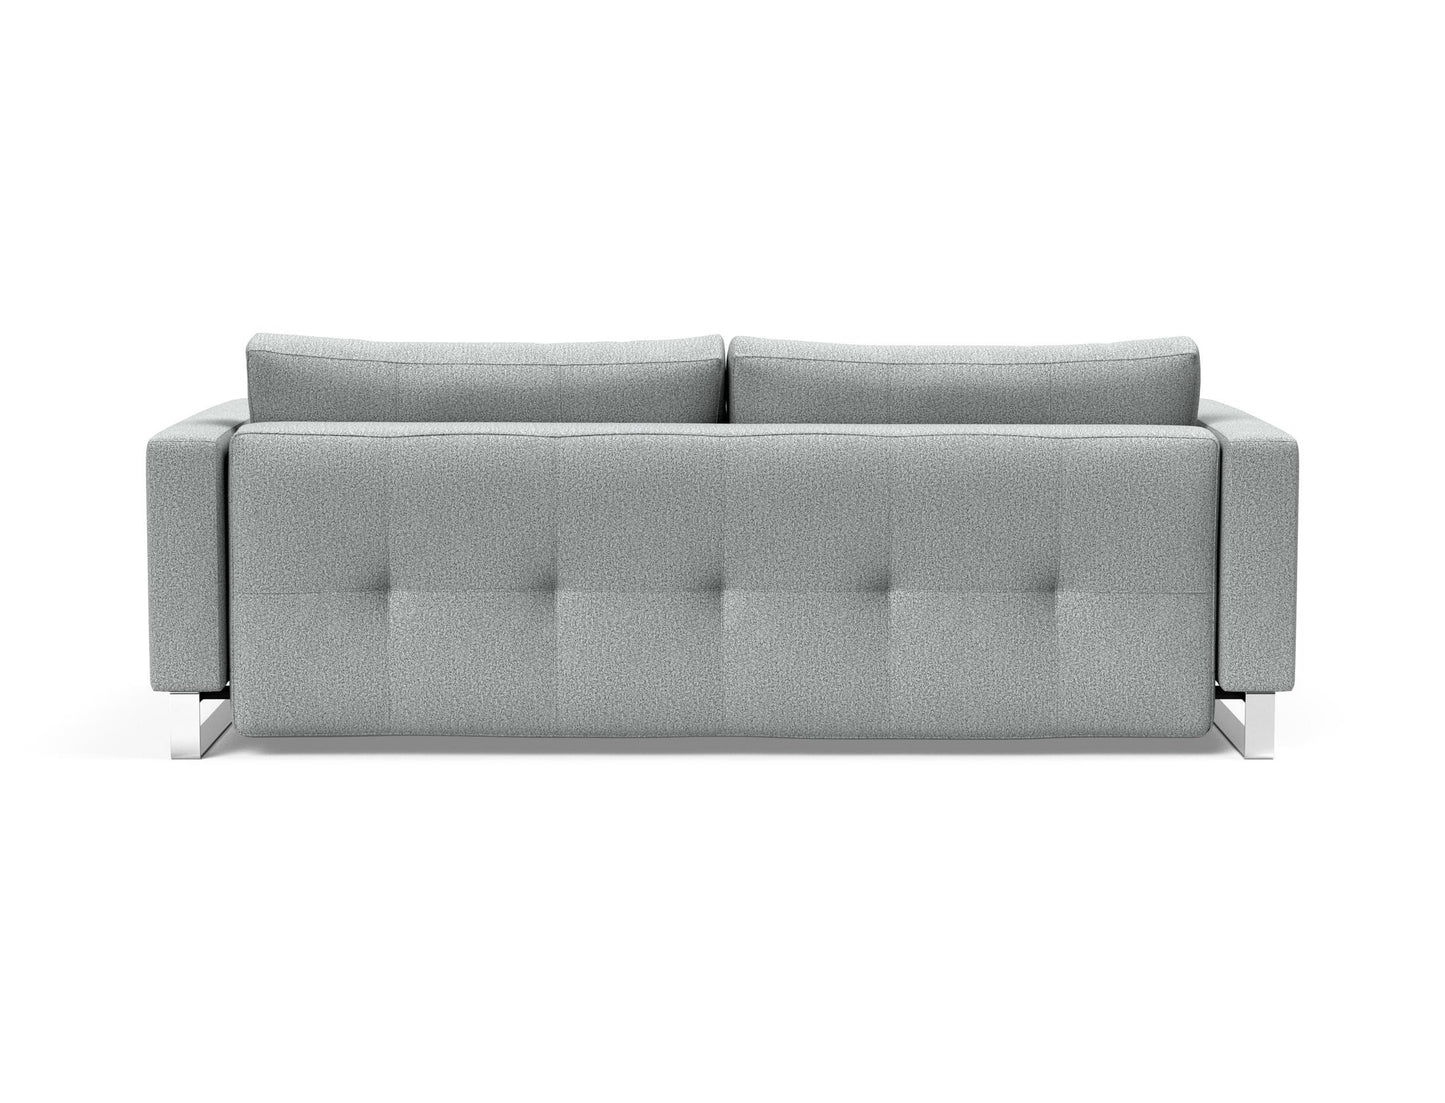 Innovation Living Cassius Deluxe Excess Lounger